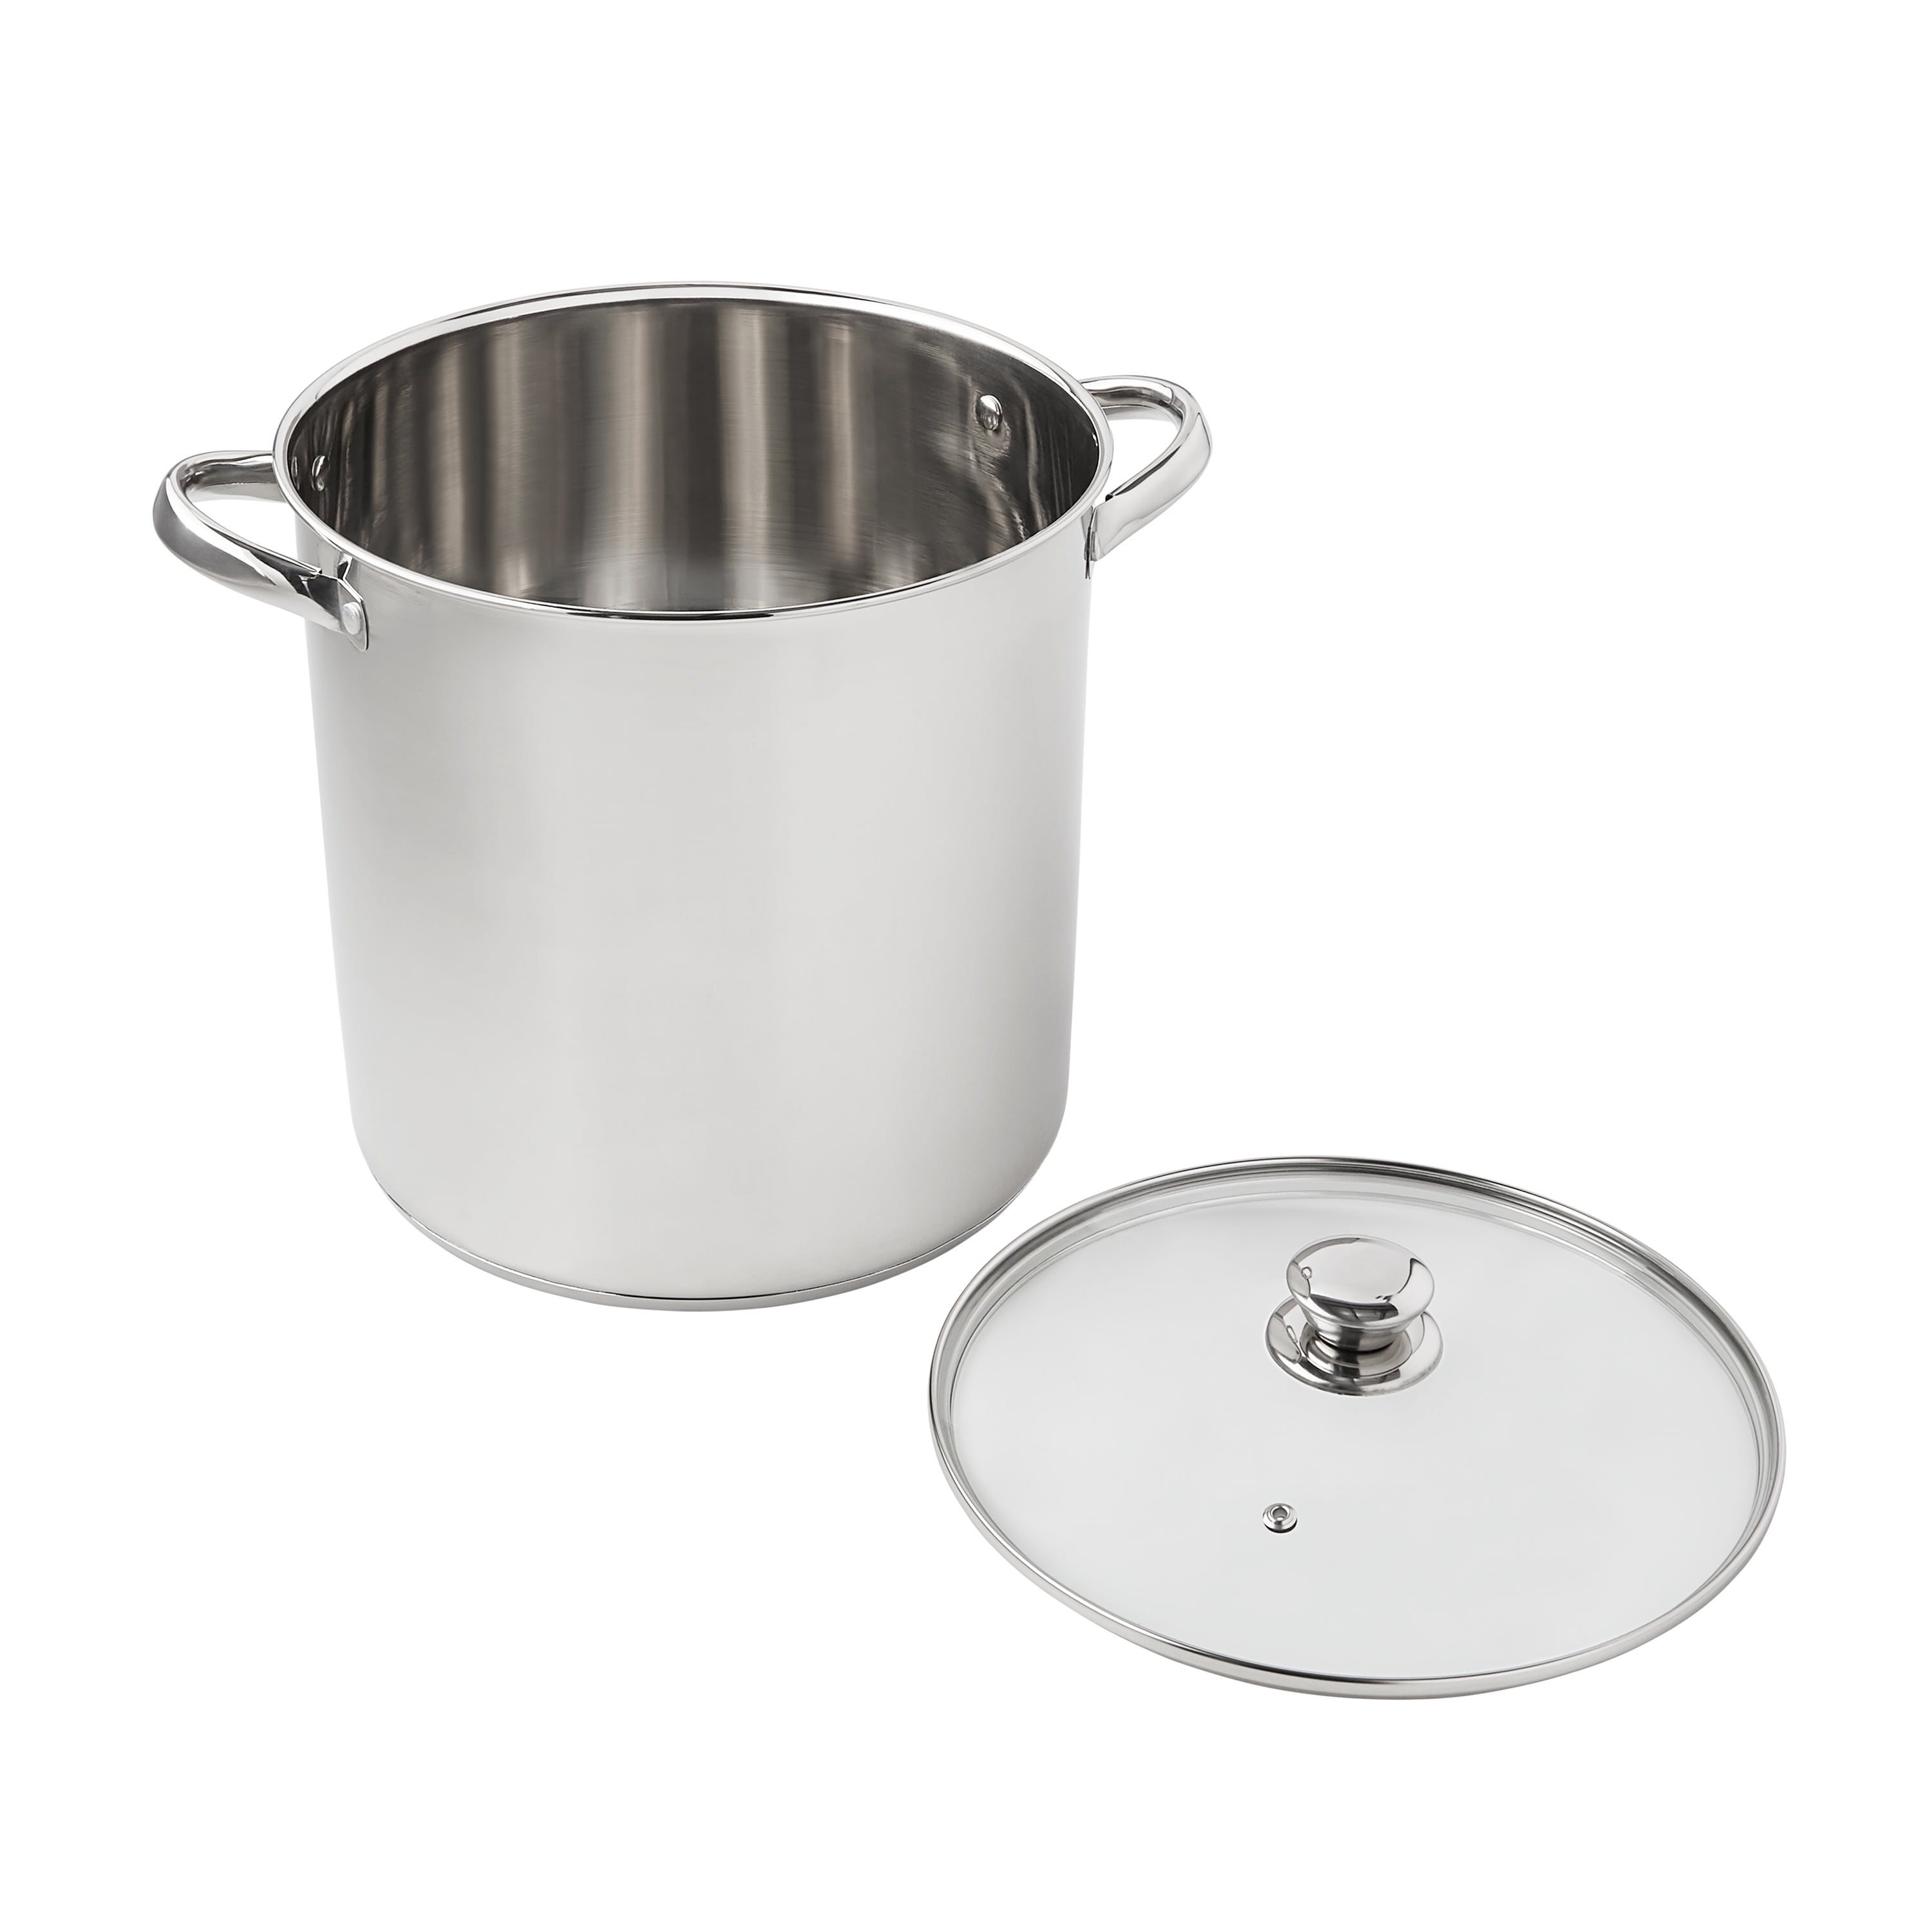 Mainstays Stainless Steel 12-Quart Stock Pot with Glass Lid, Size: 12 qt